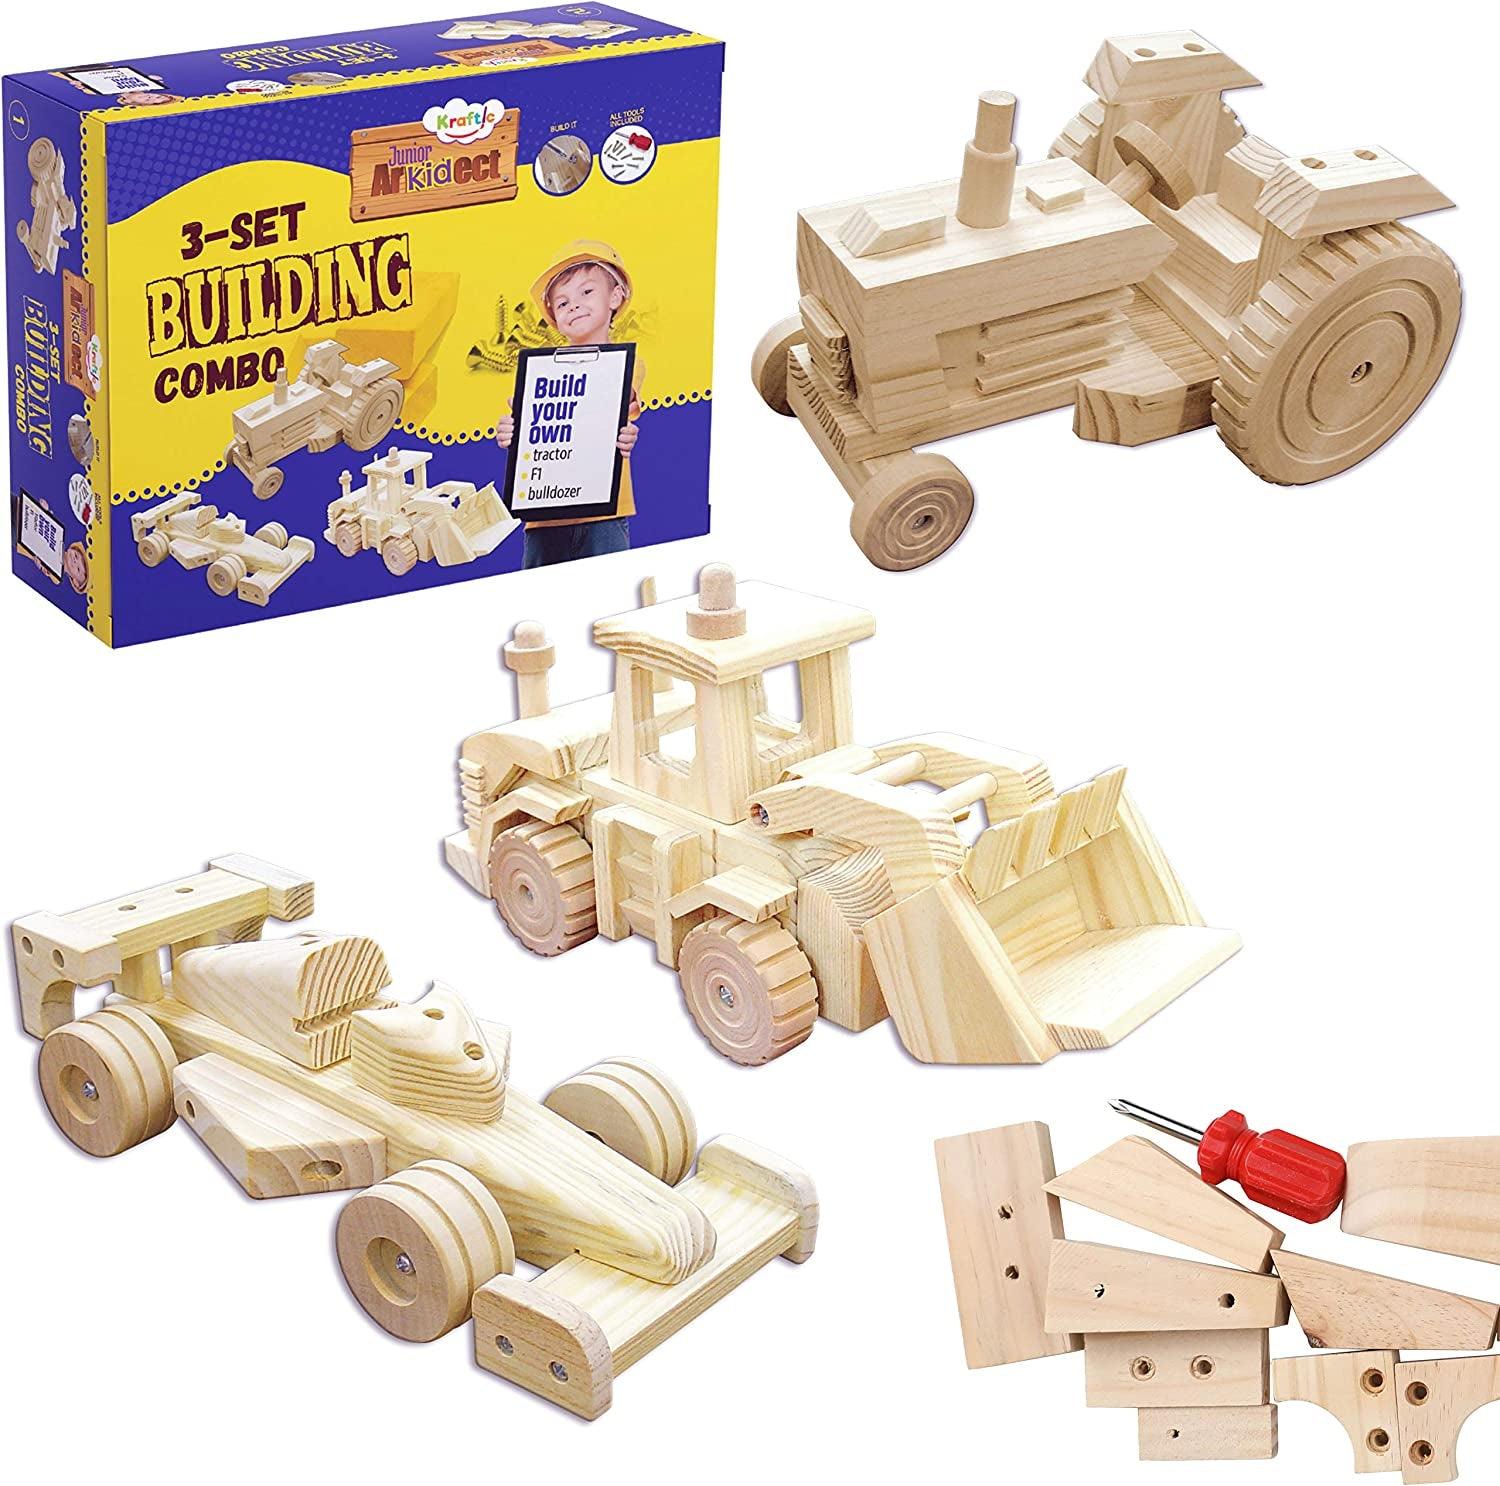 Woodworking Building Kit 3 Educational DIY Carpentry Construction Wood Kit Toy Tractor, Bulldozer and F1 - WoodArtSupply